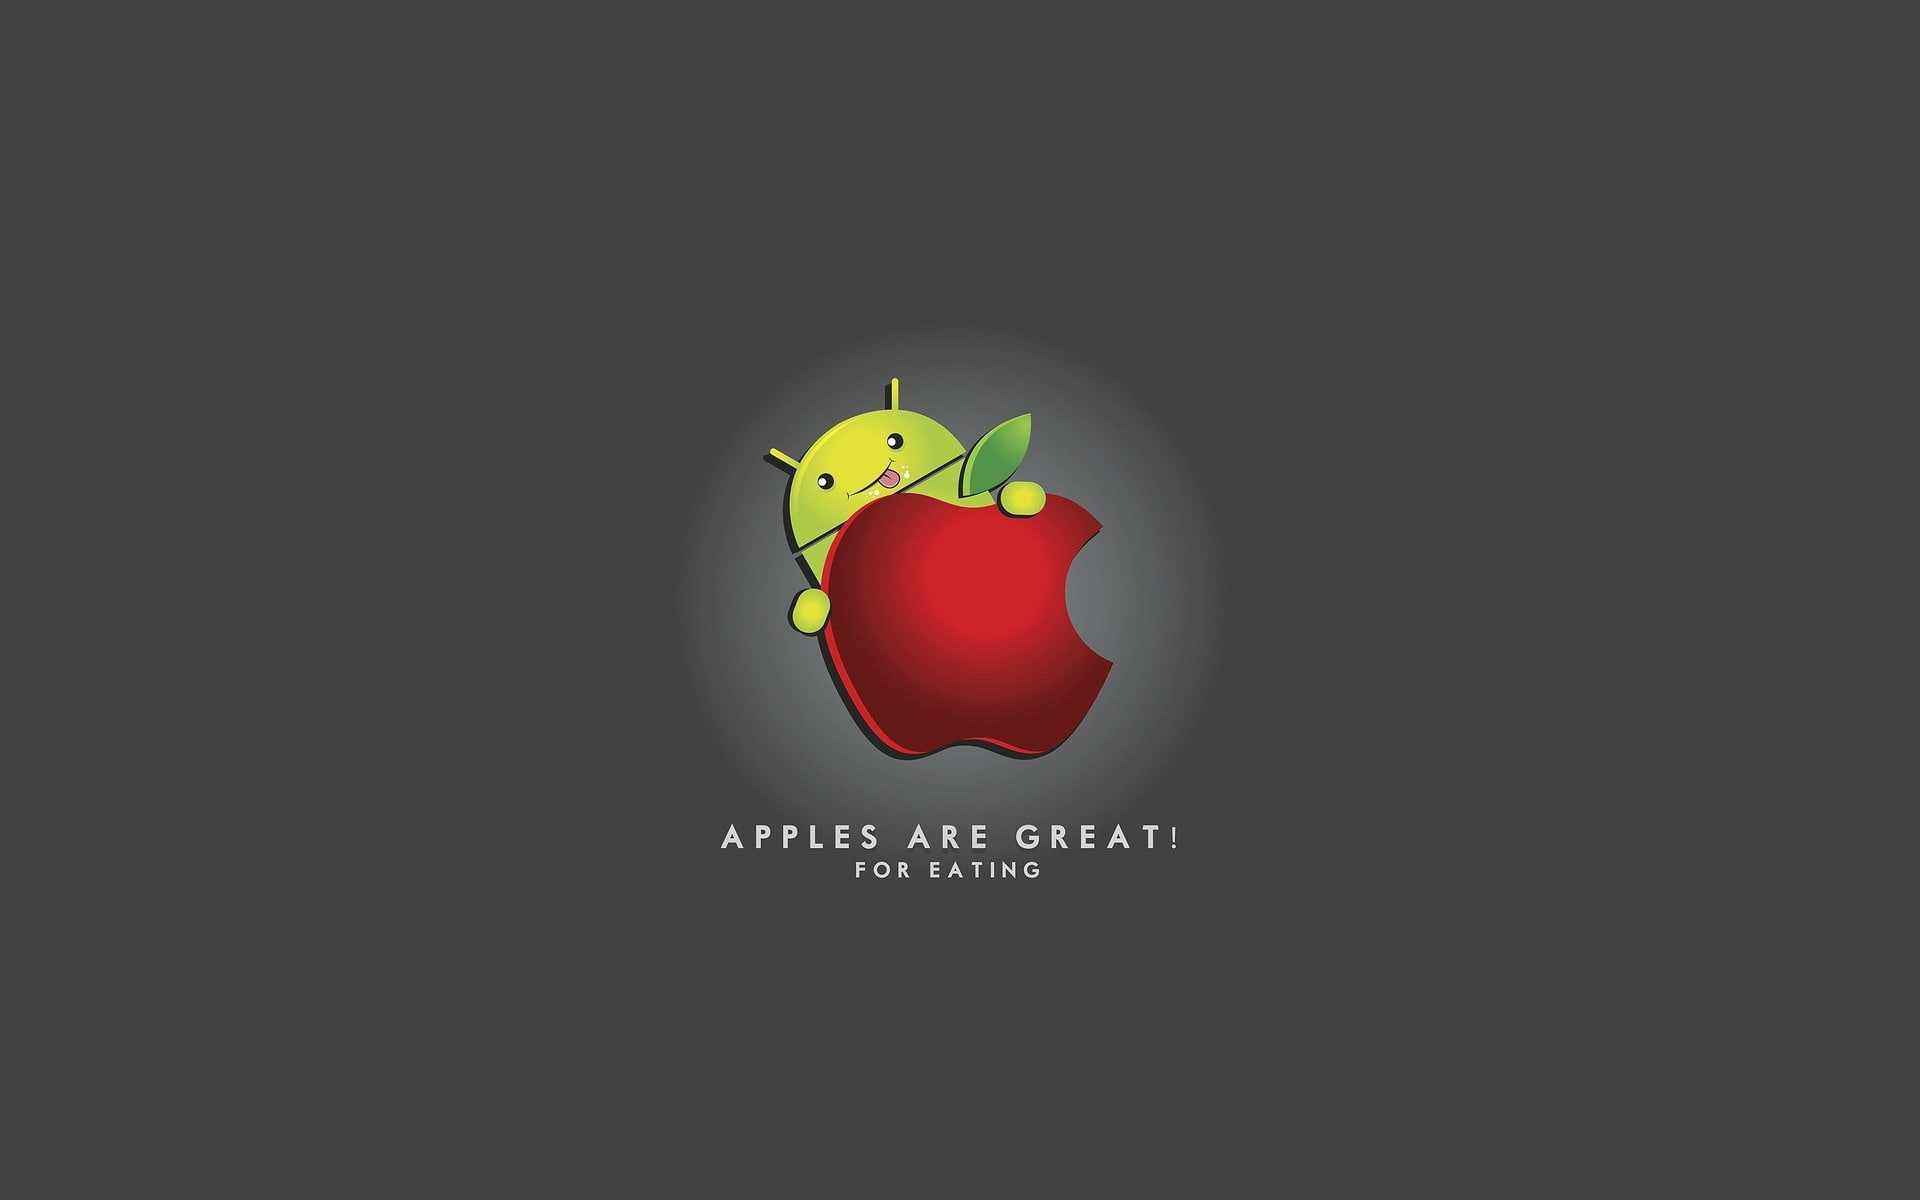 Android and Apple, android logo, funny, apple logo, logo apple